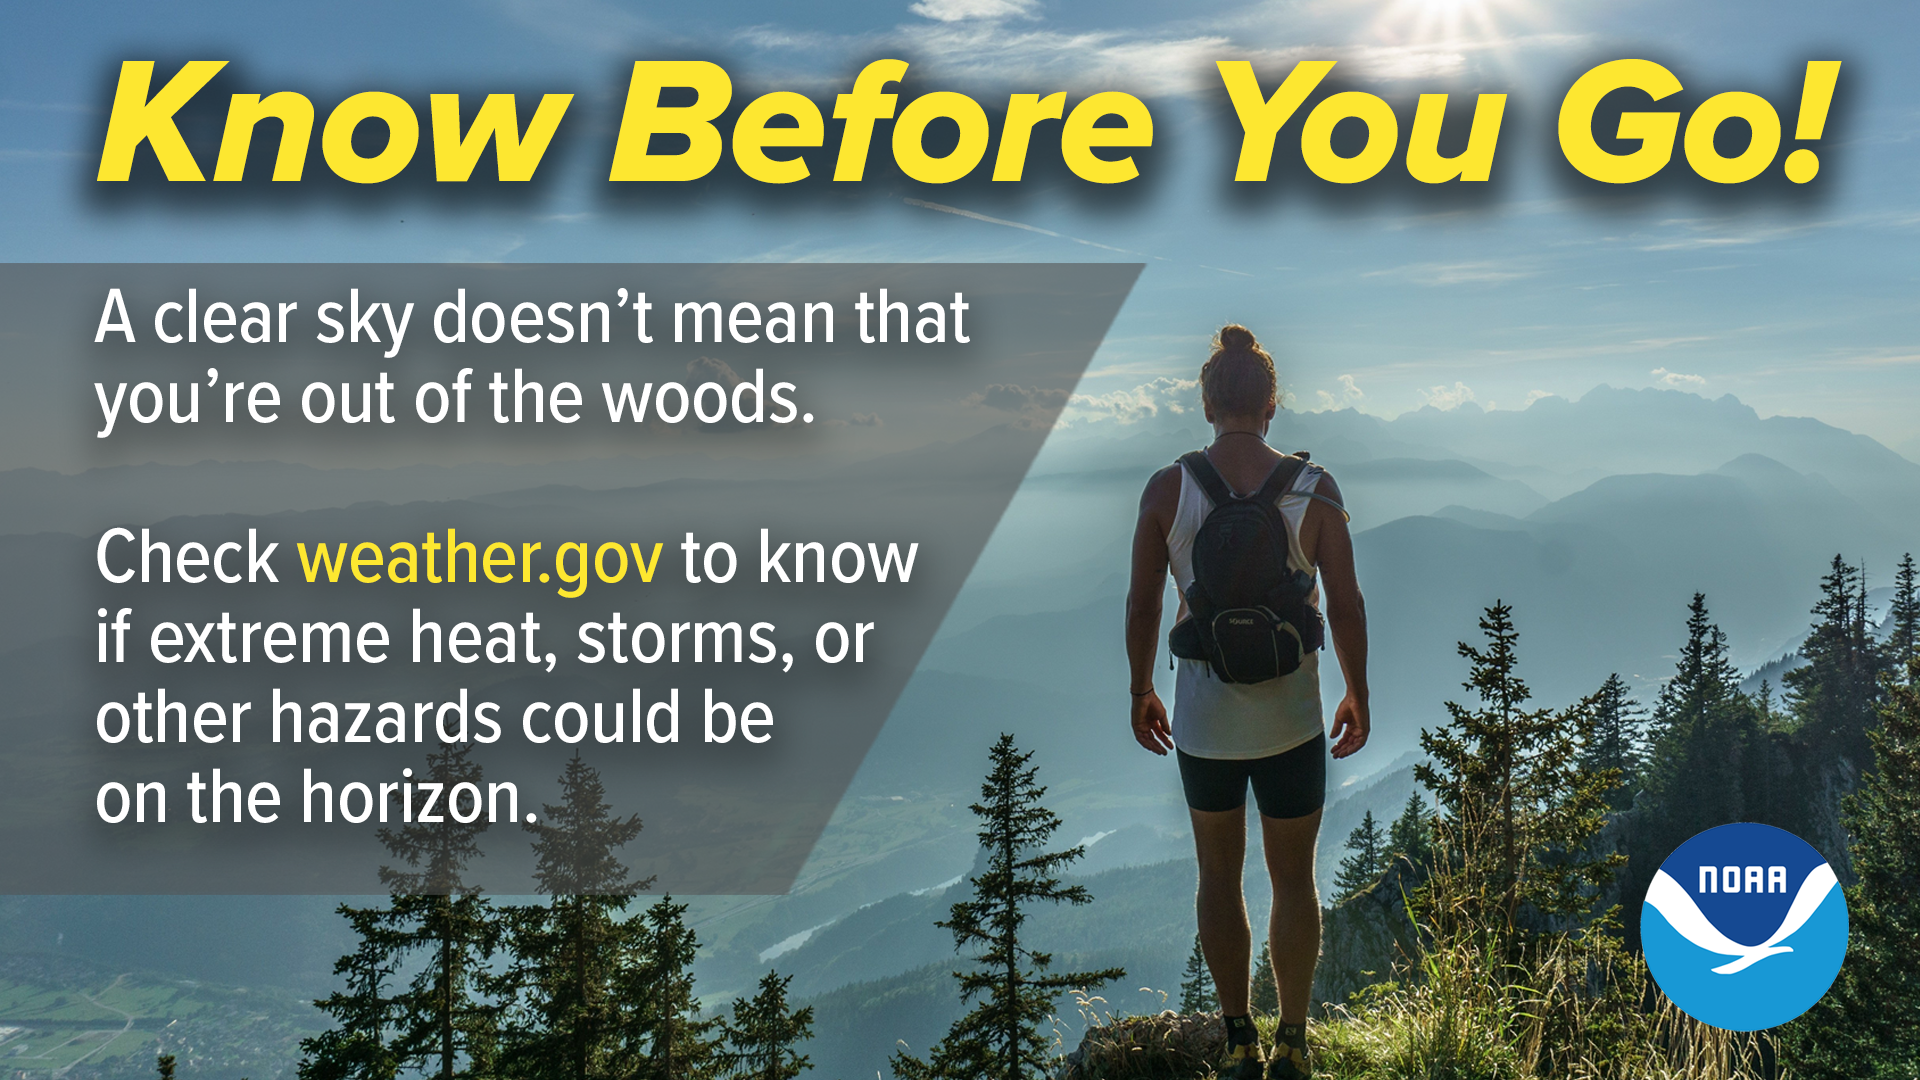 Know Before You Go! A clear sky doesn't mean you're out of the woods. Check weather.gov to know if extreme heat, storms, or other hazards could be on the horizon.